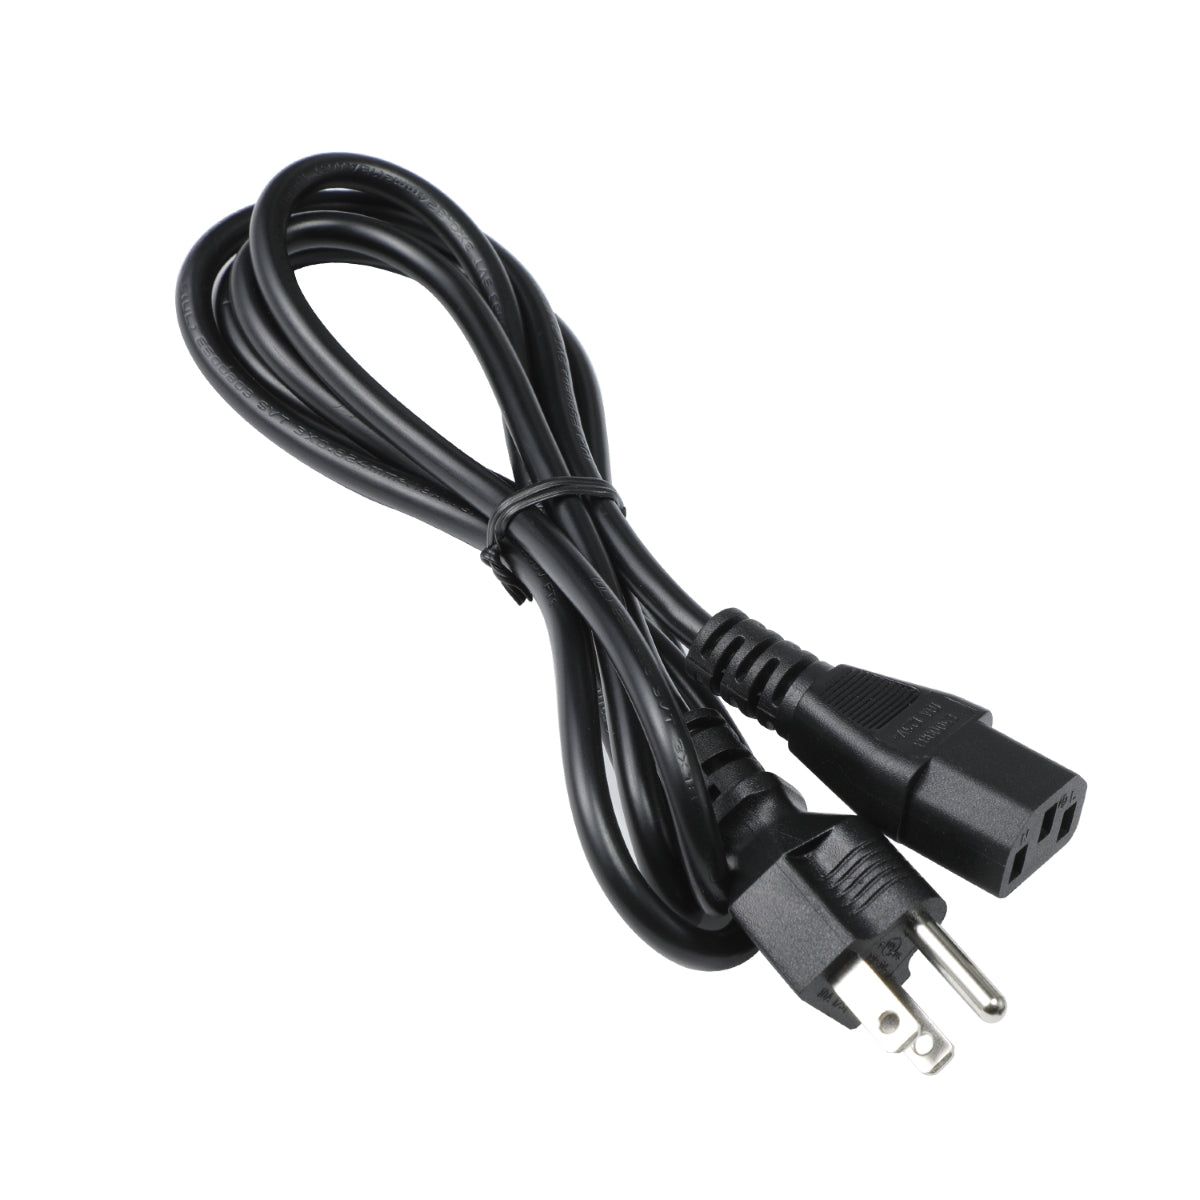 Power Cord for BenQ GW2765HT IPS Monitor